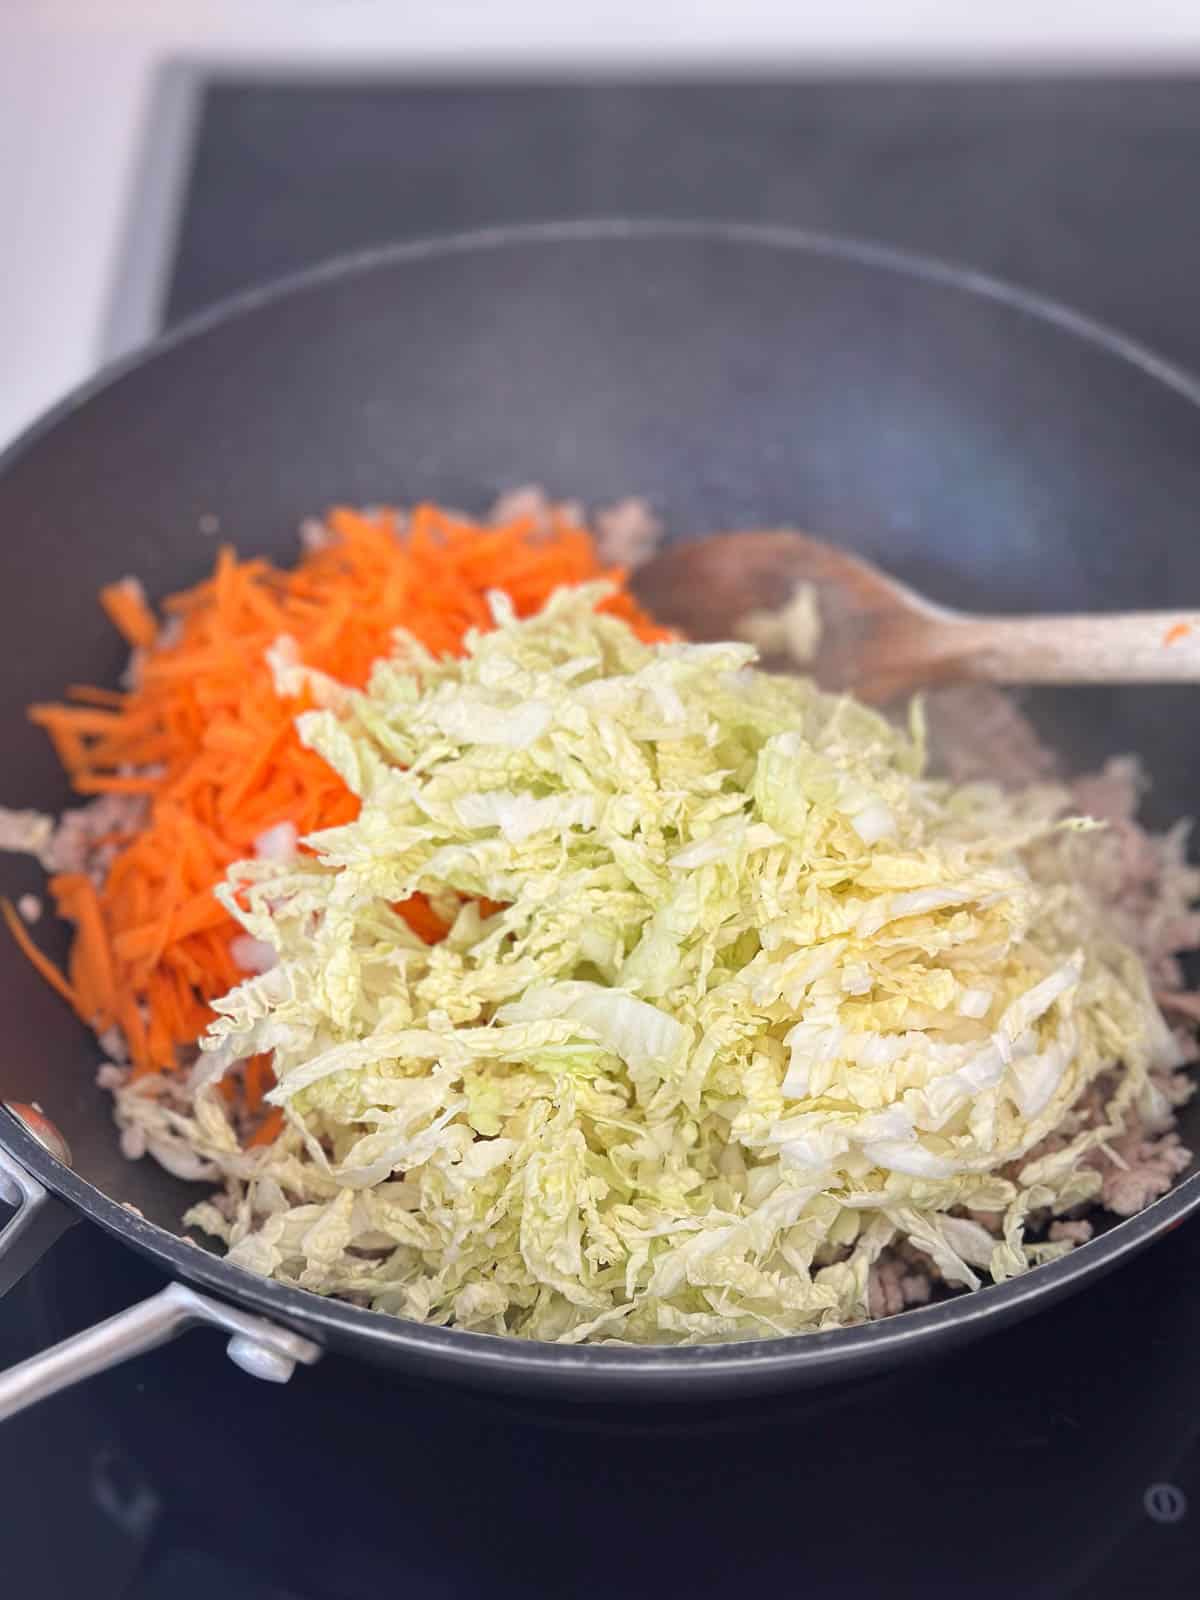 Adding carrot and cabbage to wok.